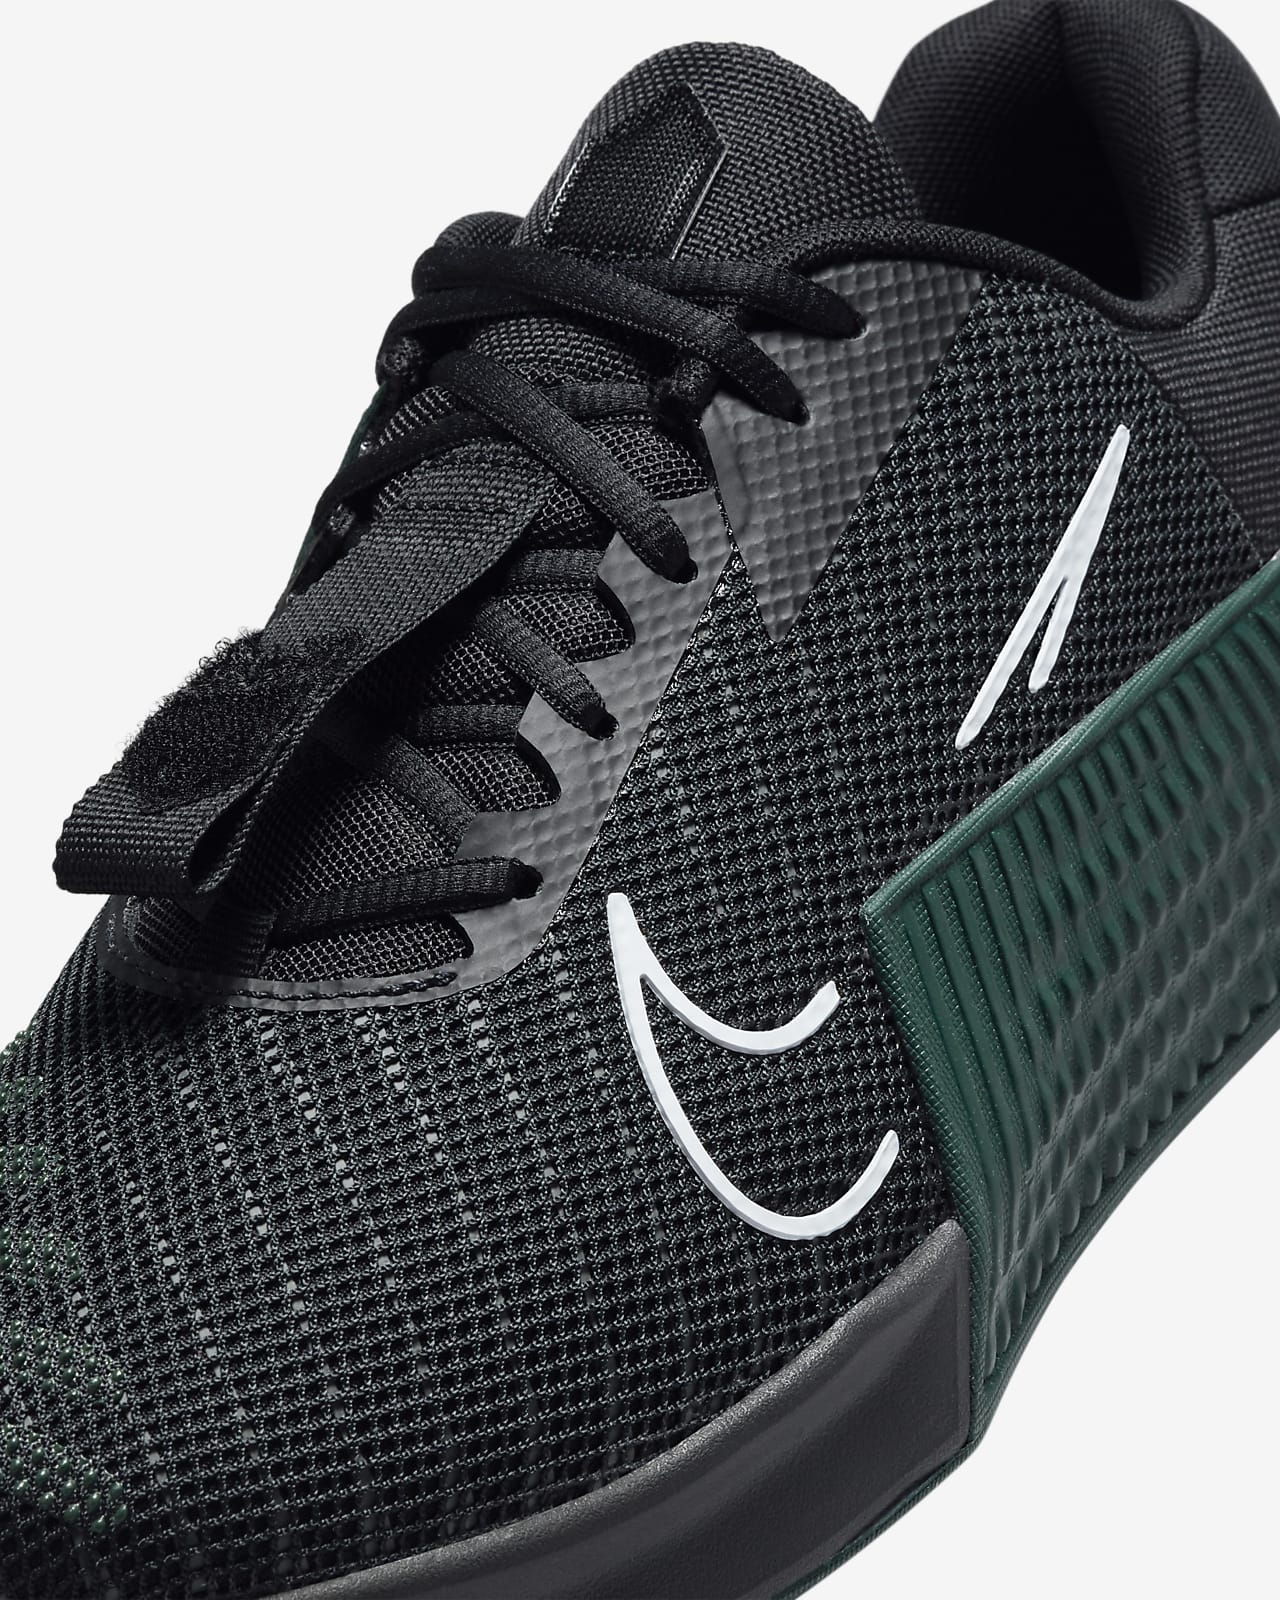 soon NIKE METCON 9! Official images of the pending all new Nike